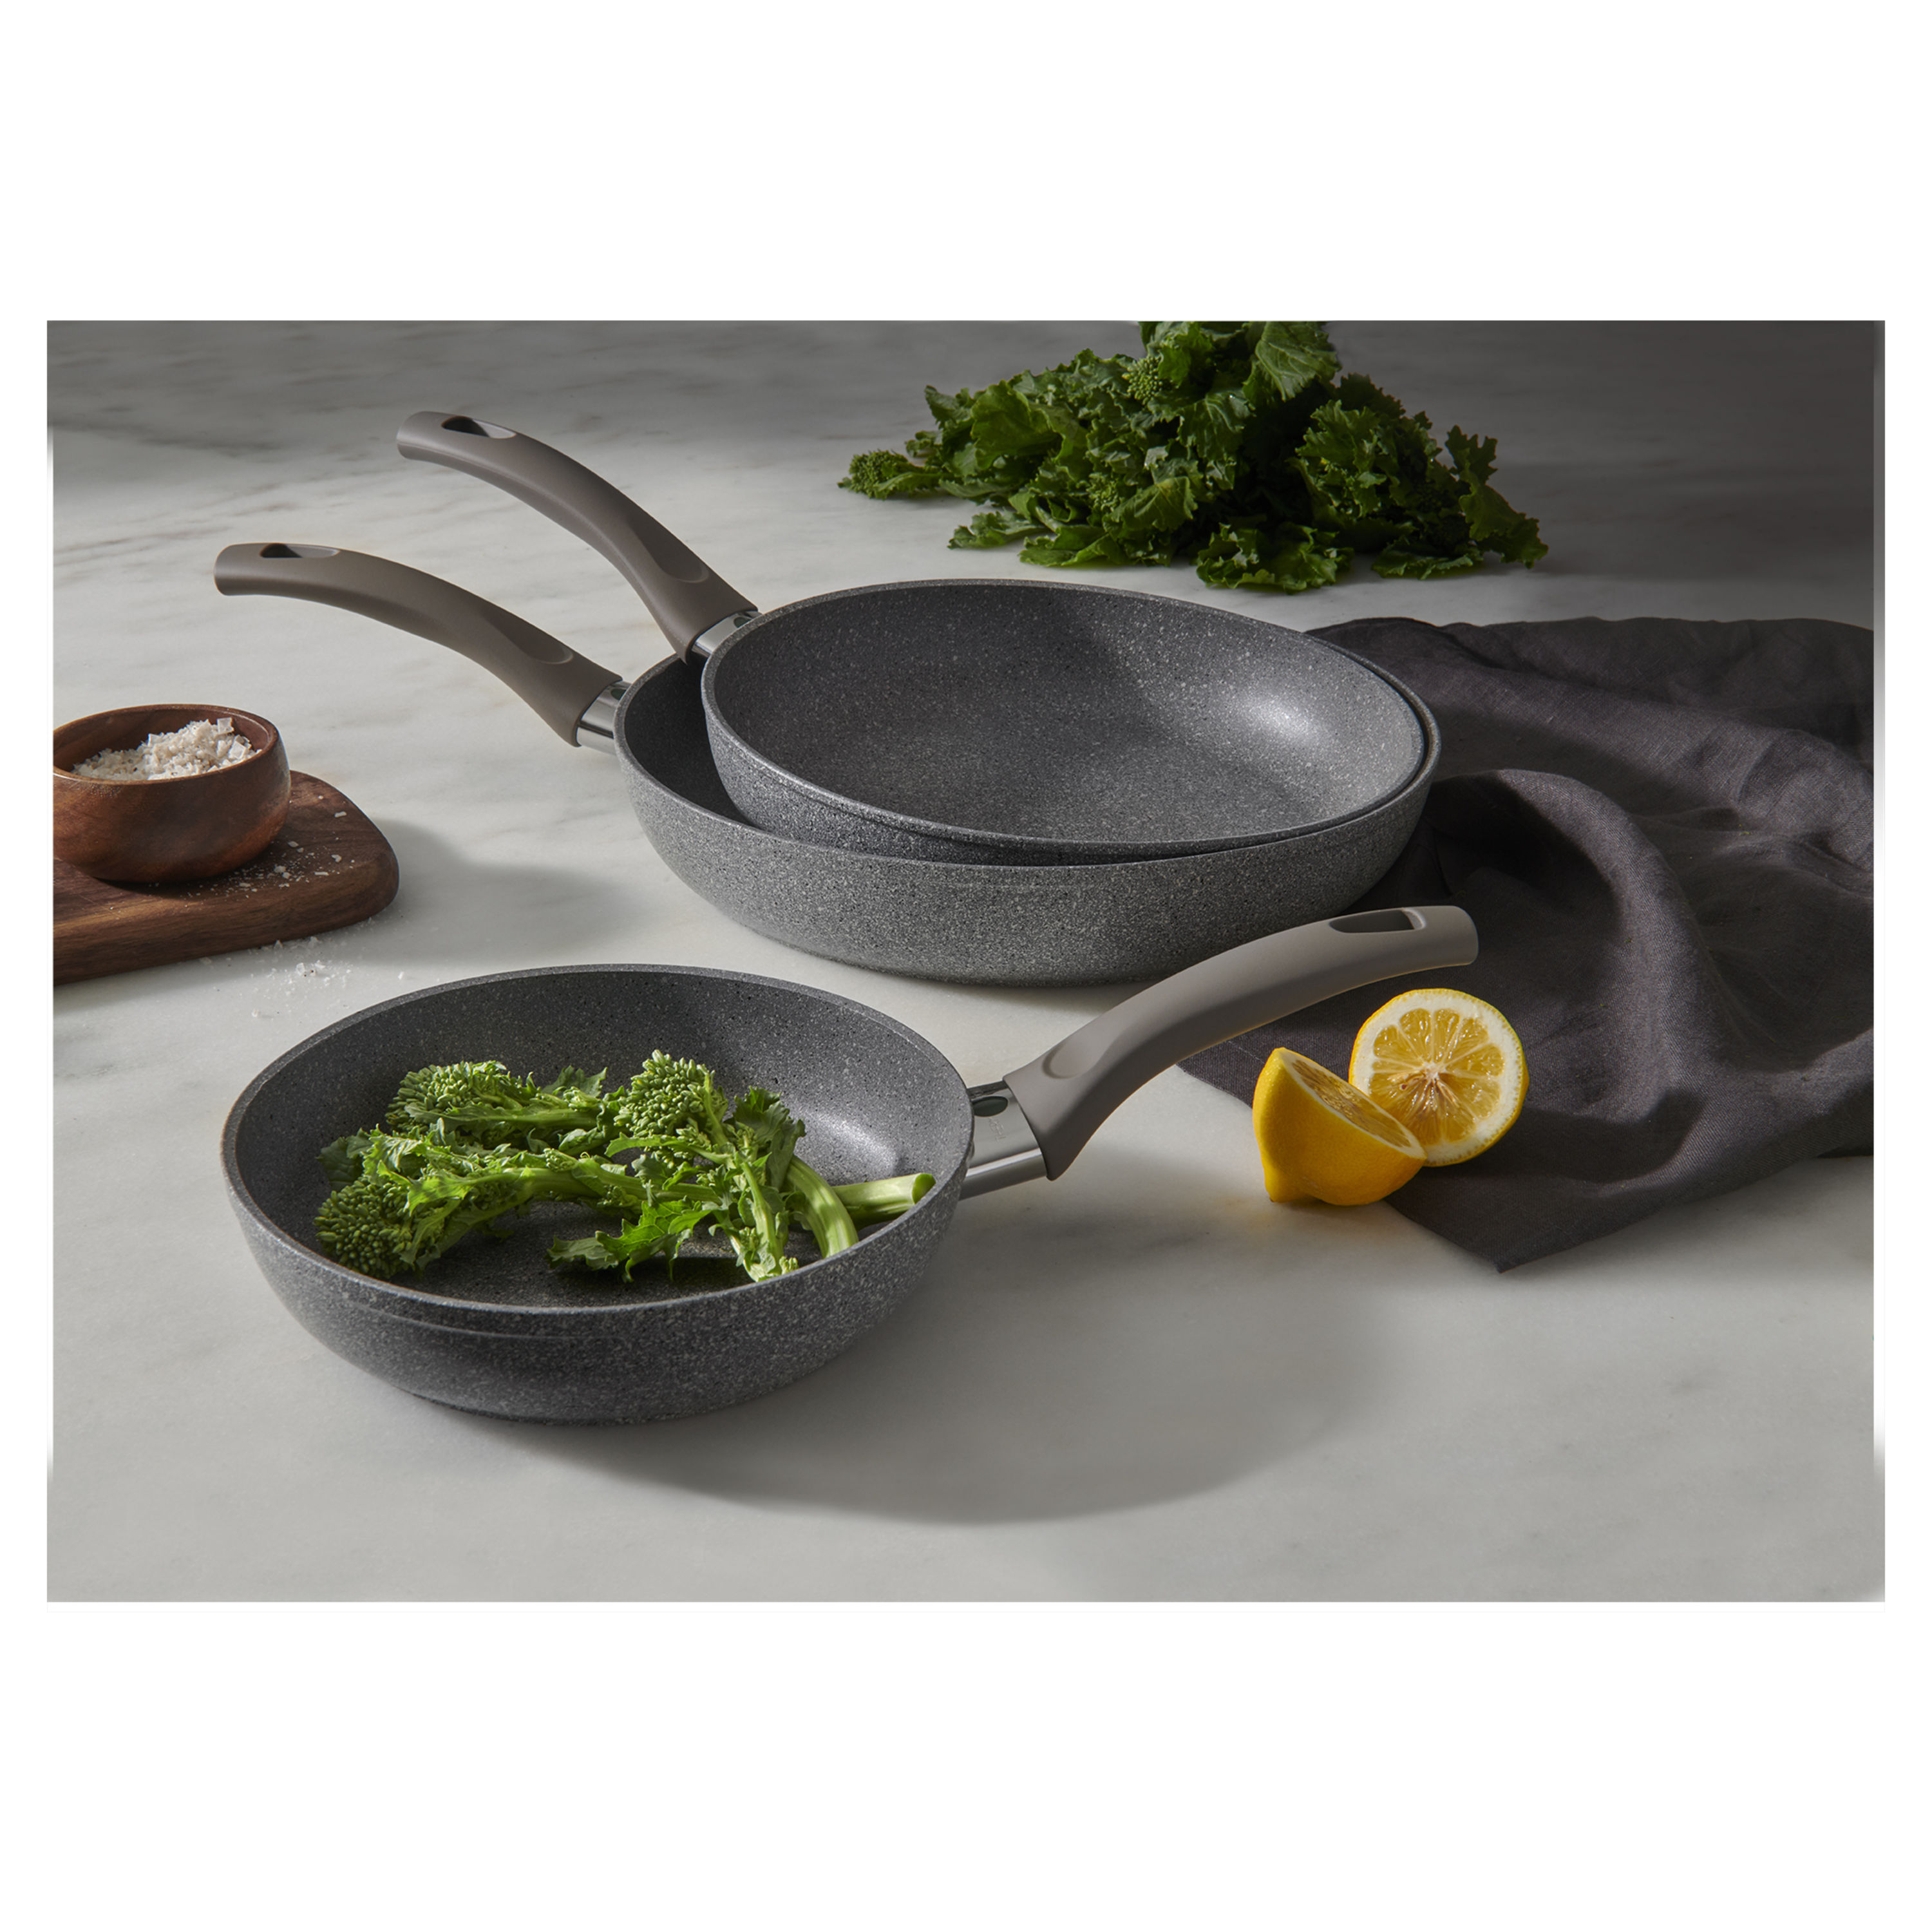  Ballarini Click & Cook 5-pc Nonstick Cookware Set, Made in  Italy: Home & Kitchen